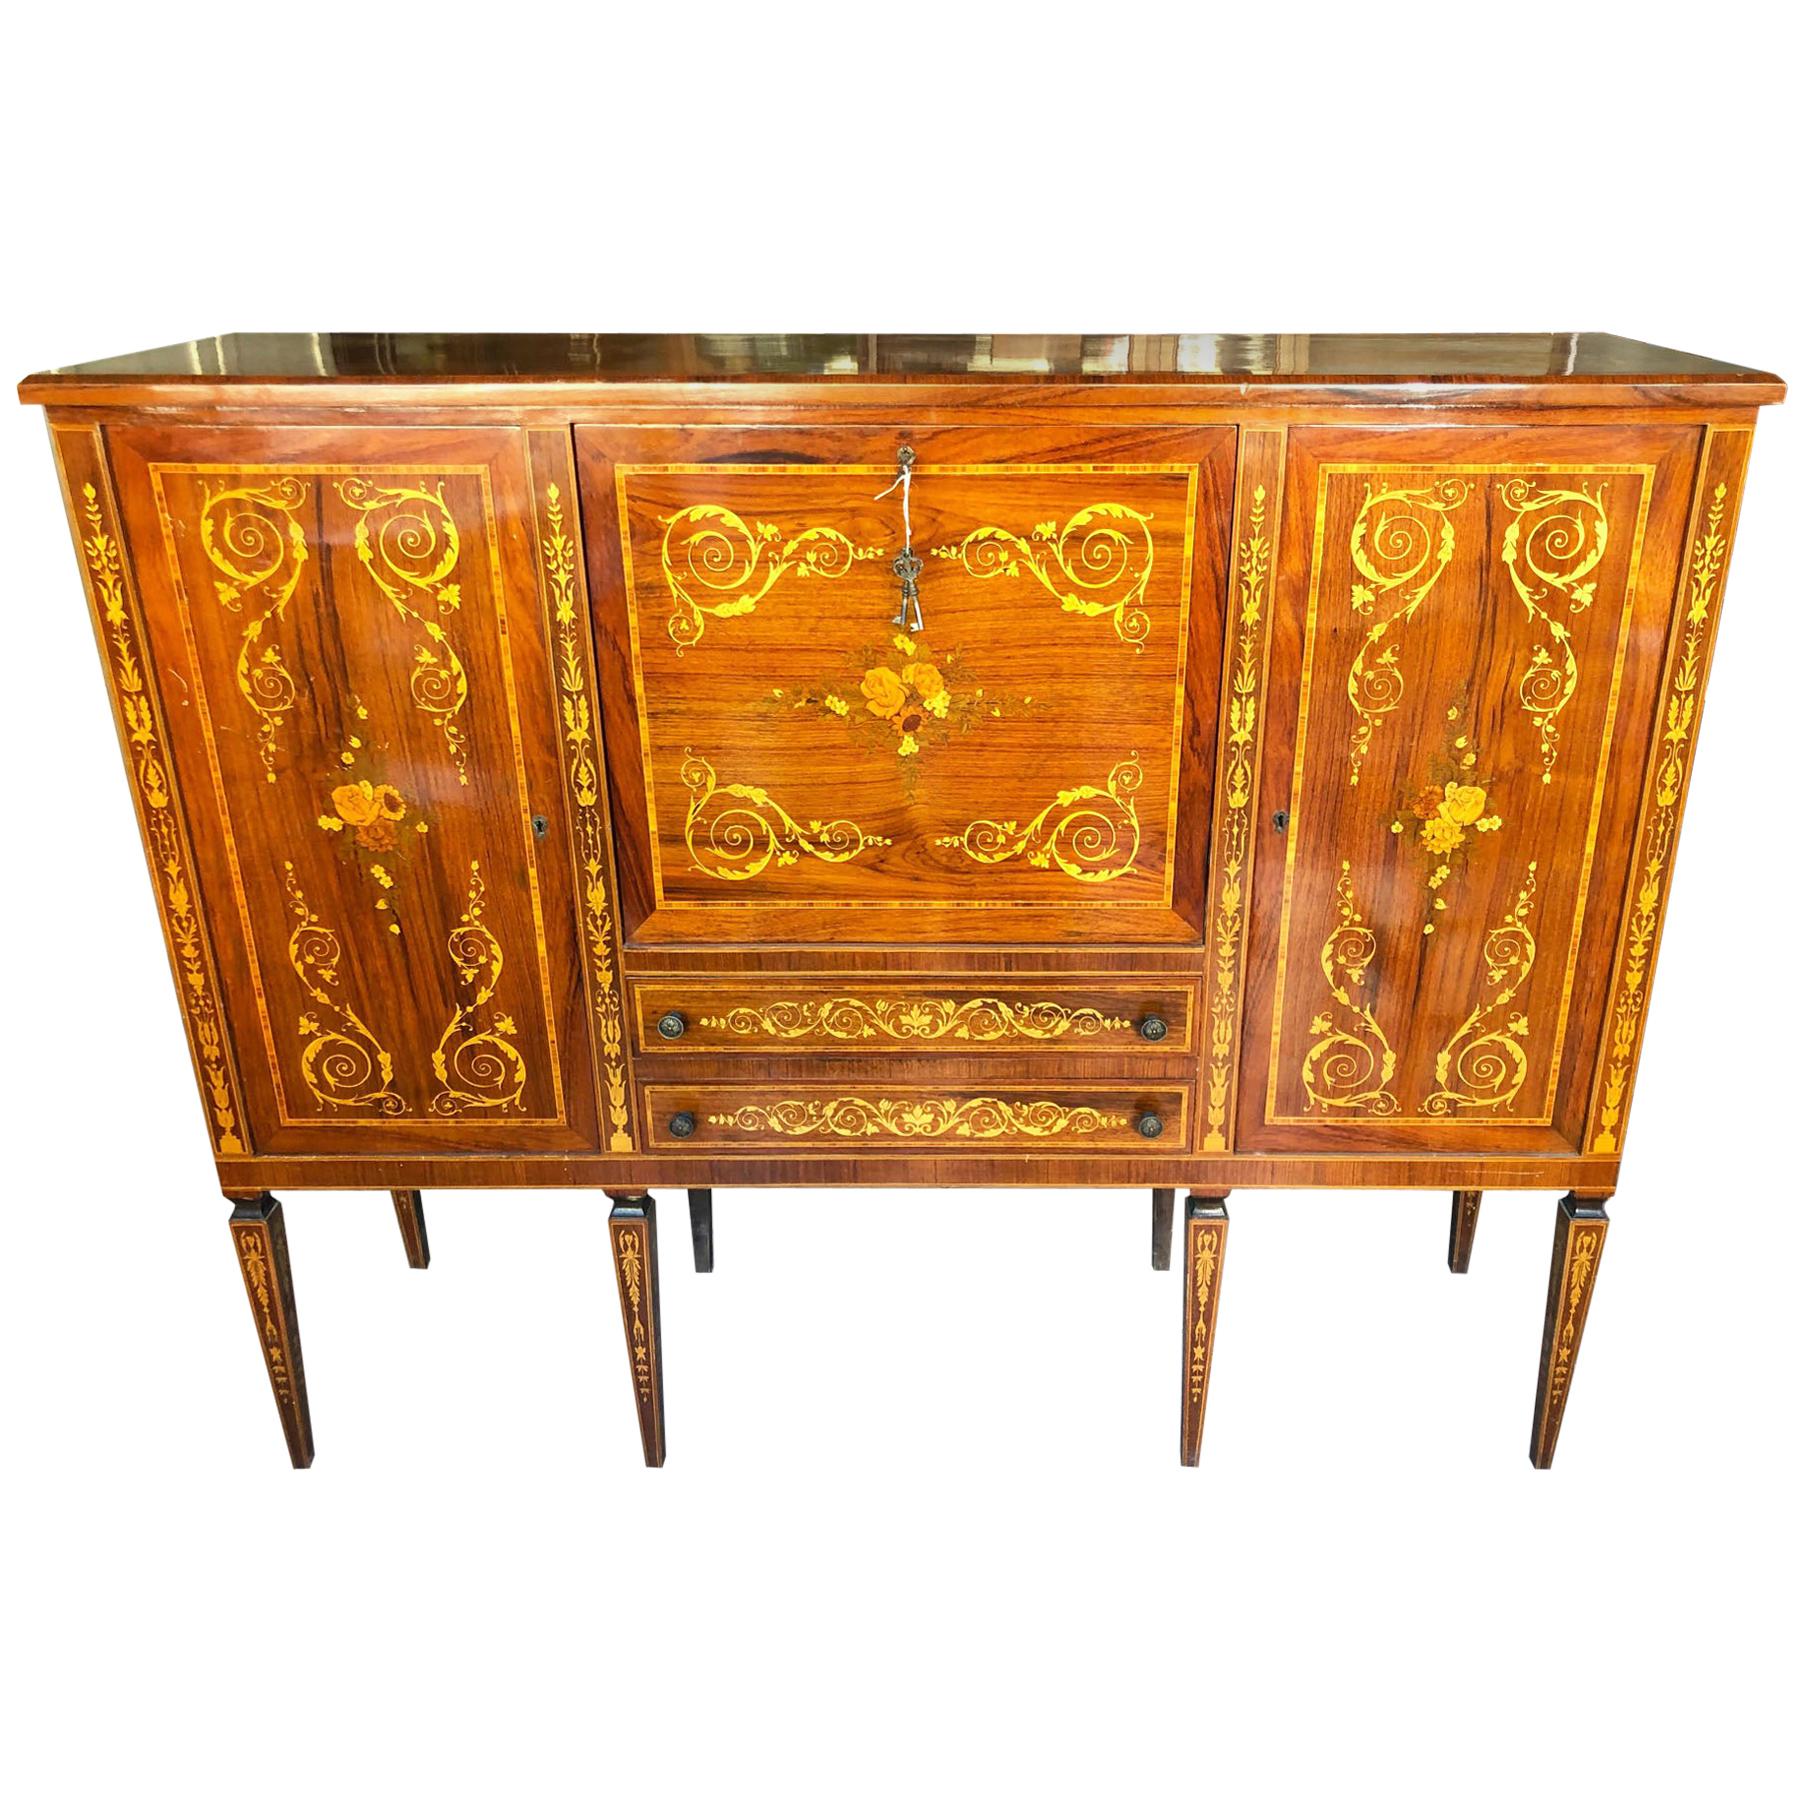 1960s Sideboard with Maggiolini Type Inlays Walnut For Sale